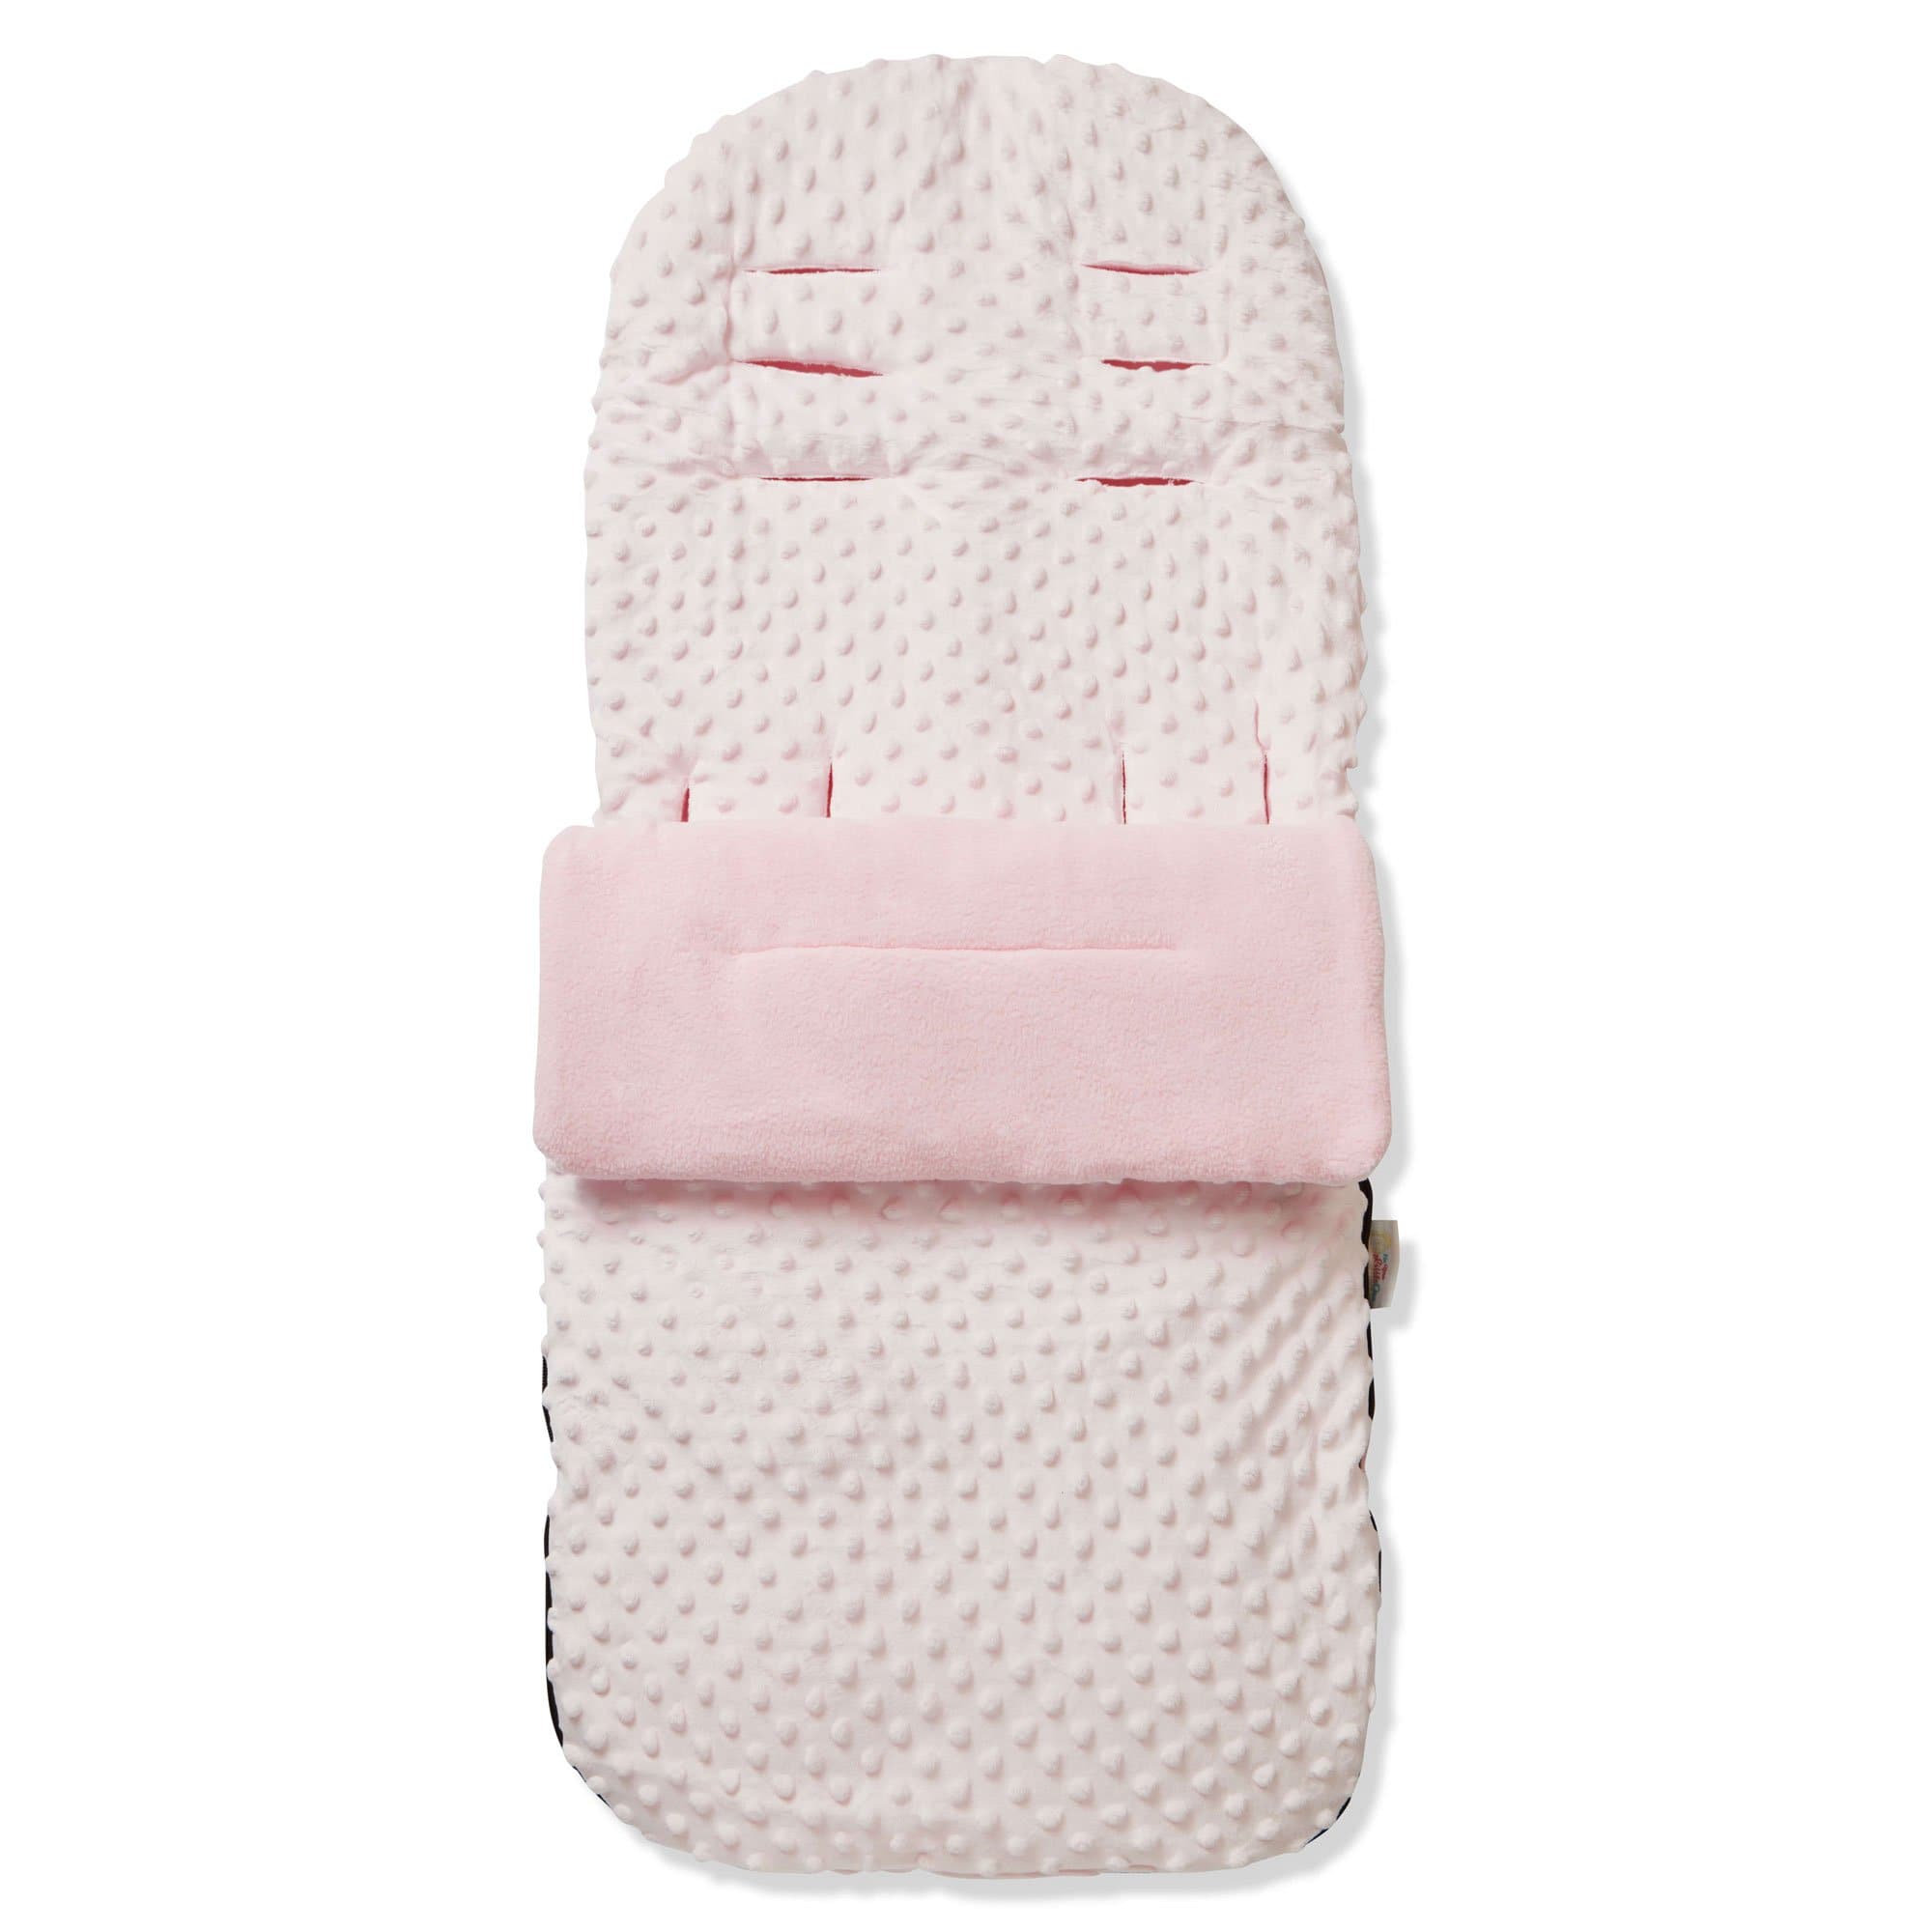 Dimple Footmuff / Cosy Toes Compatible with Zeta - Pink / Fits All Models | For Your Little One